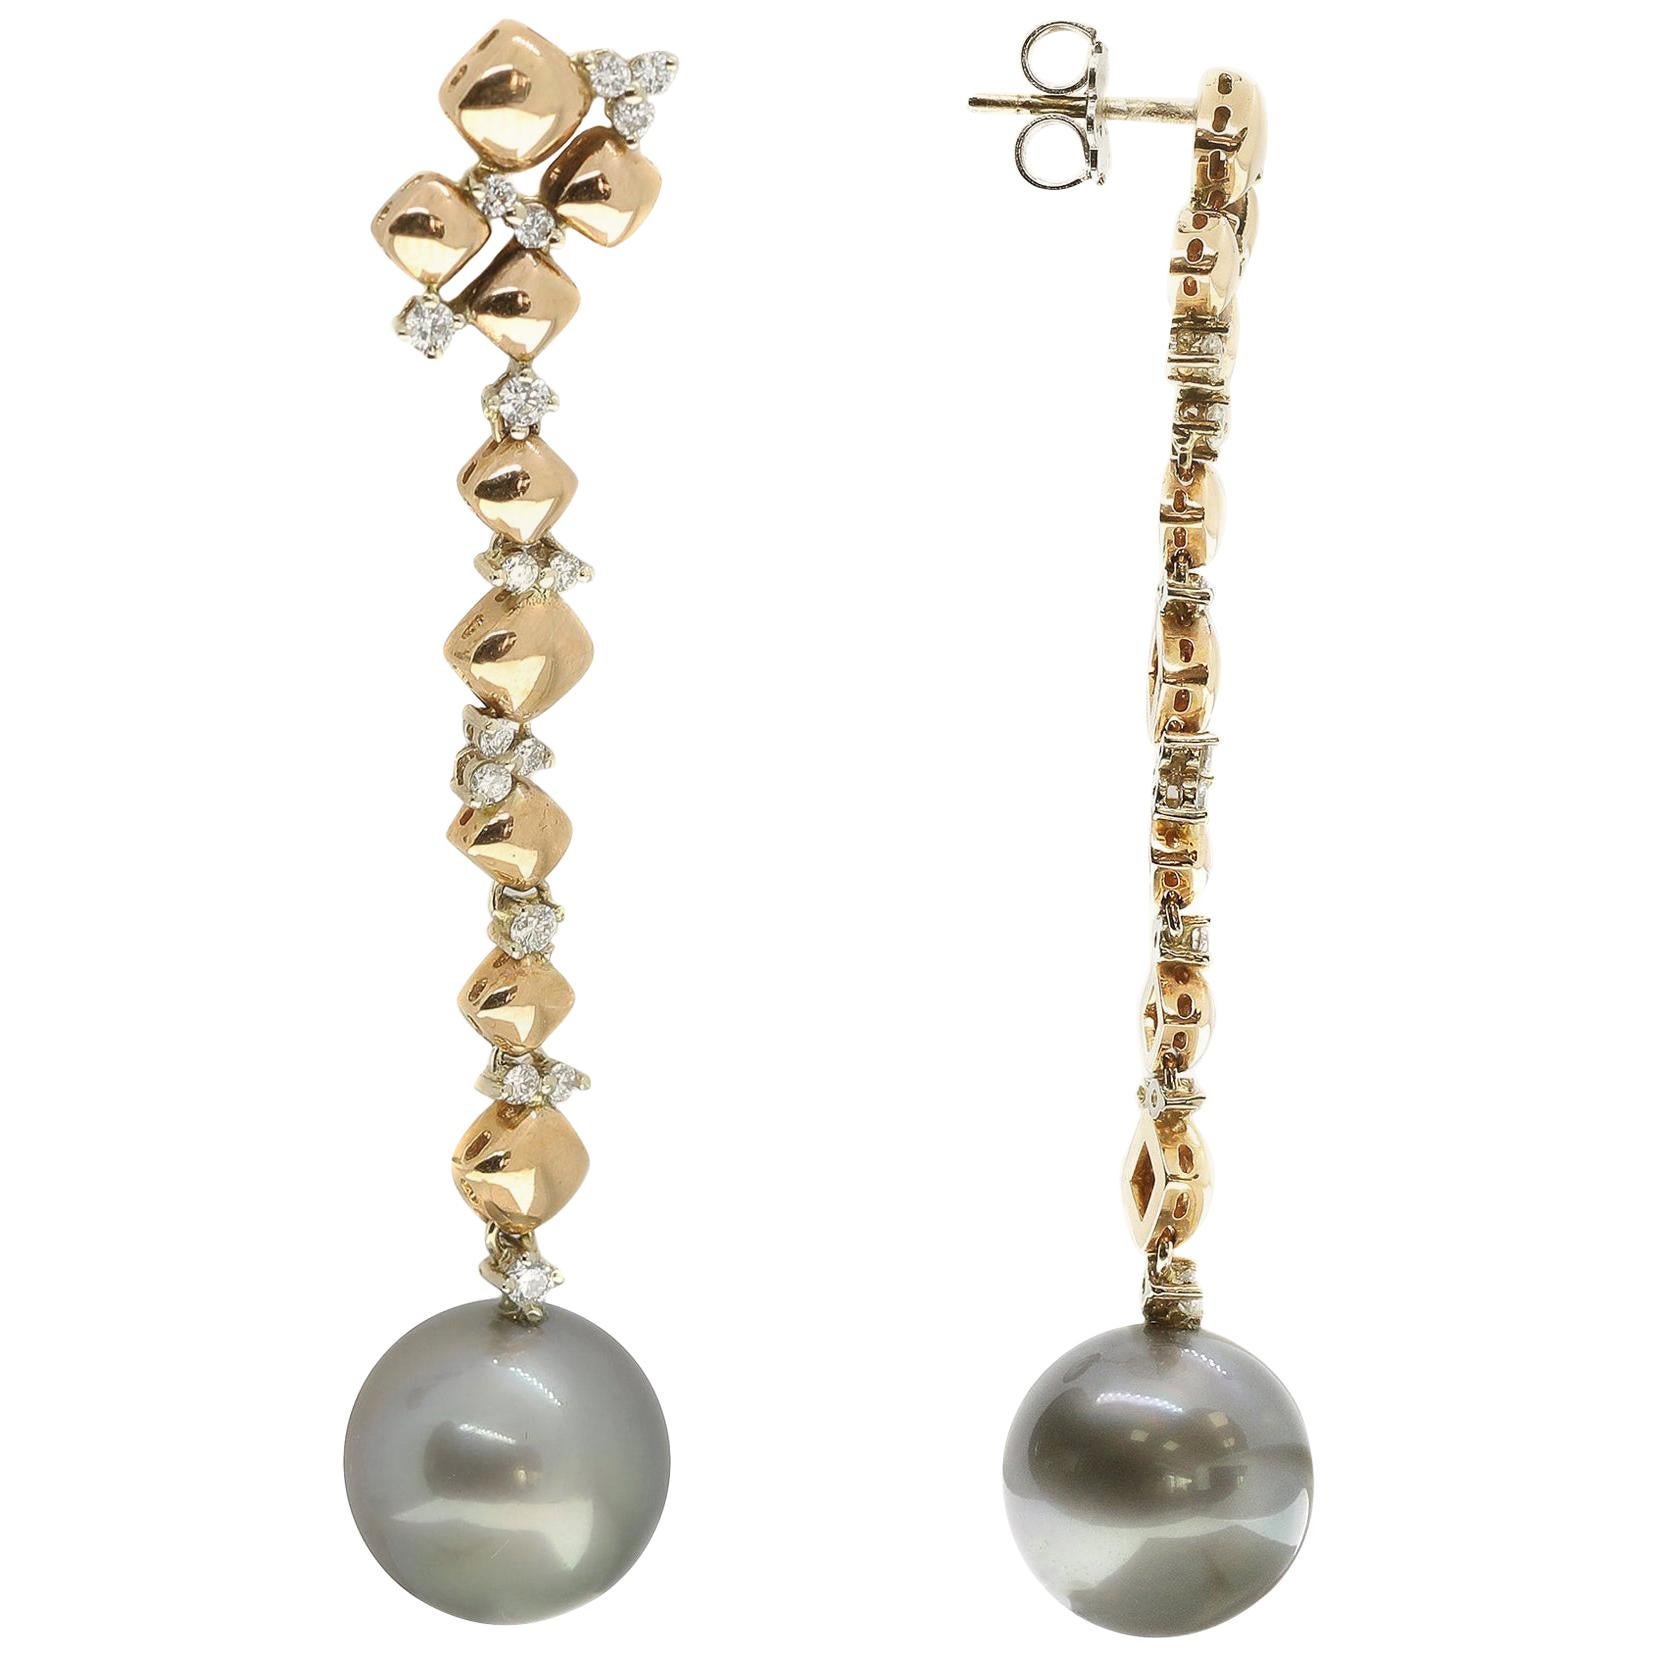 The definition of elegance, these drop earrings with Tahitian pearls and white diamonds have been masterfully created by hand from 18-karat white and rose gold. 

These postback earrings, measuring 6.5 centimetres long, are as much an objet d'art as